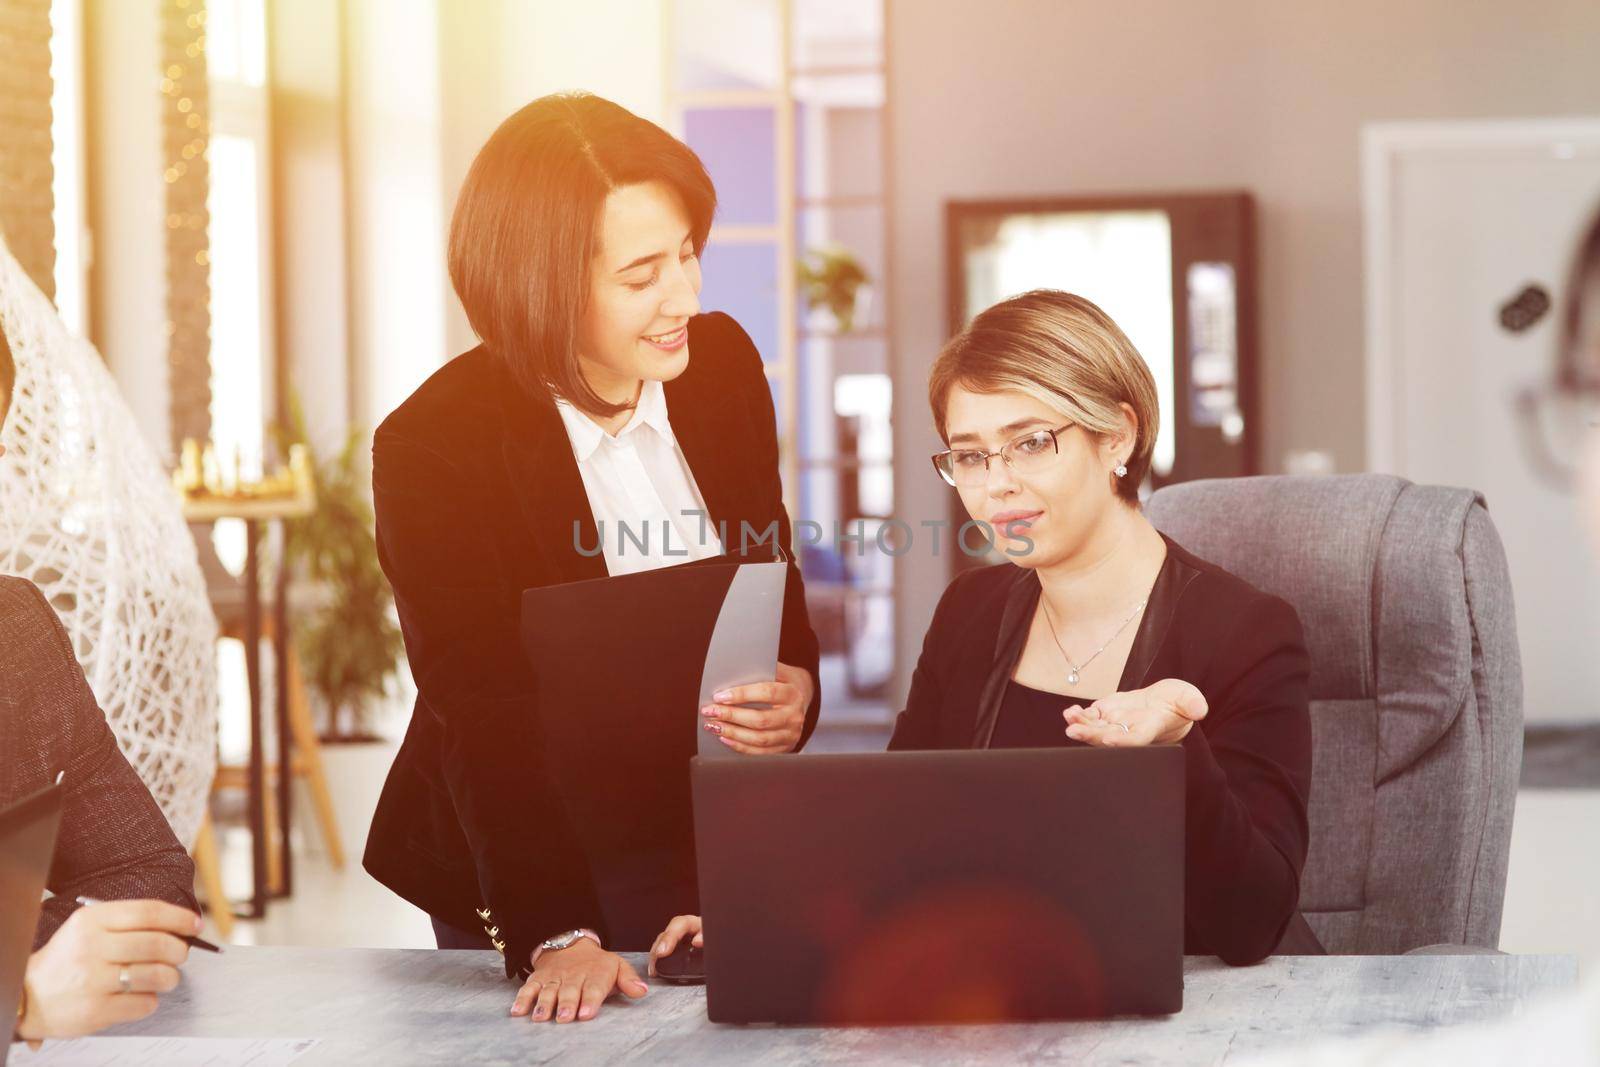 Two young business women in the office, analyzing information looking into a laptop and smiling by selinsmo